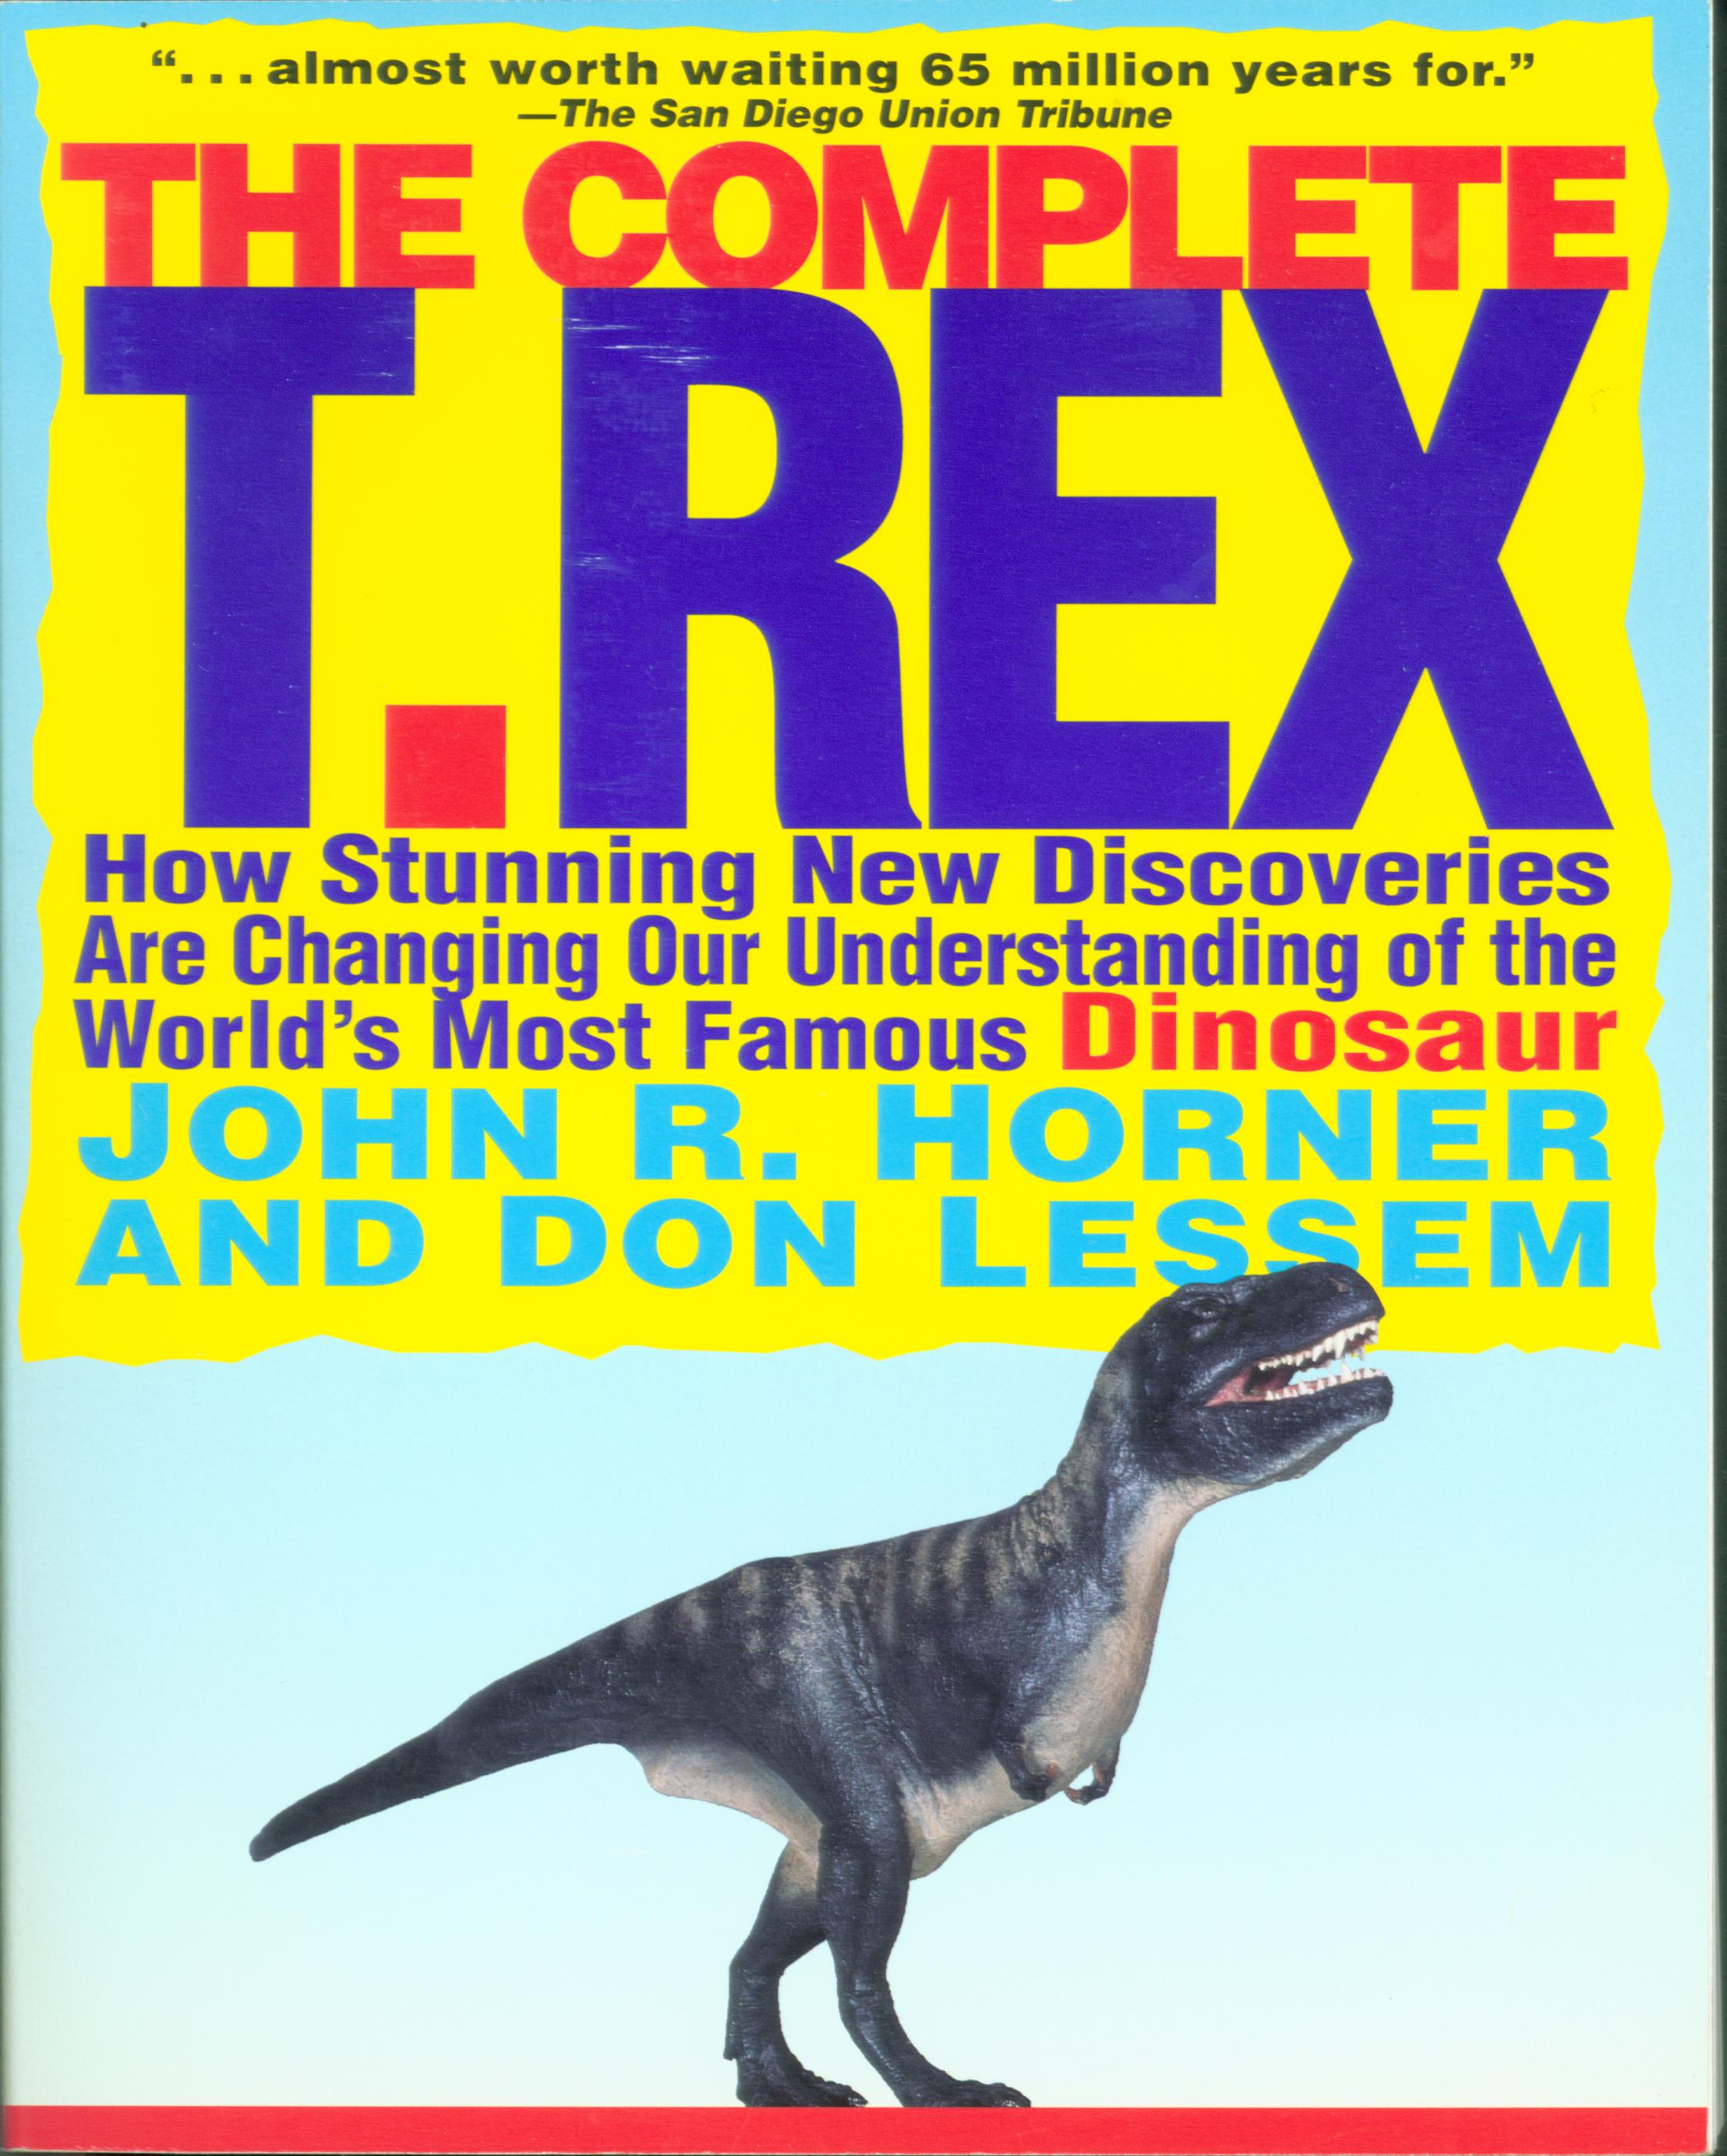 THE COMPLETE T.REX.